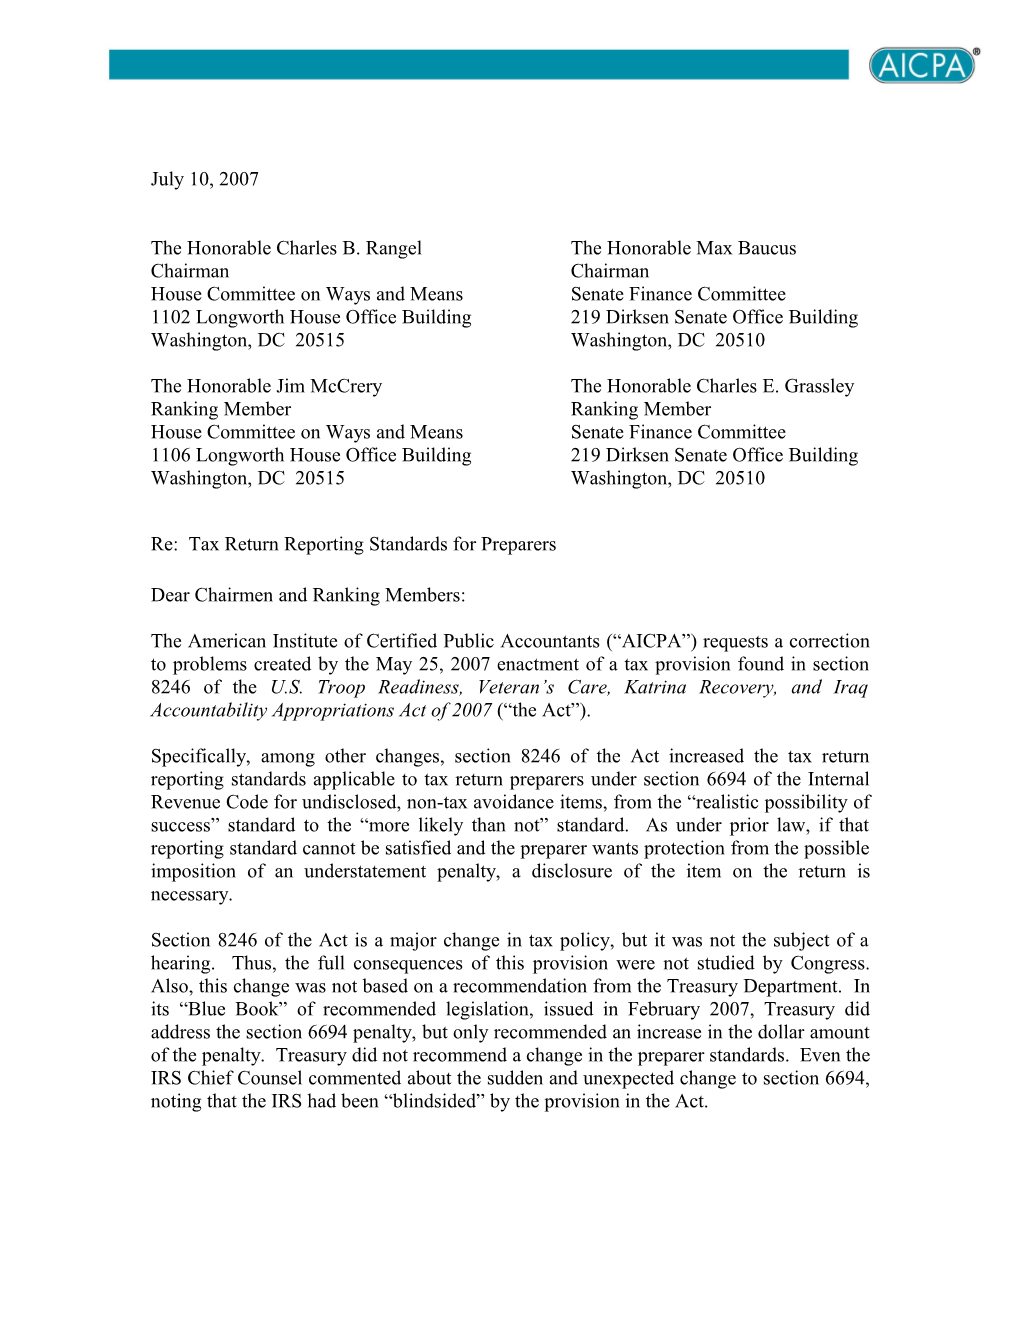 AICPA Letter to House and Senate Tax-Writing Committees Urging a Legislative Change To